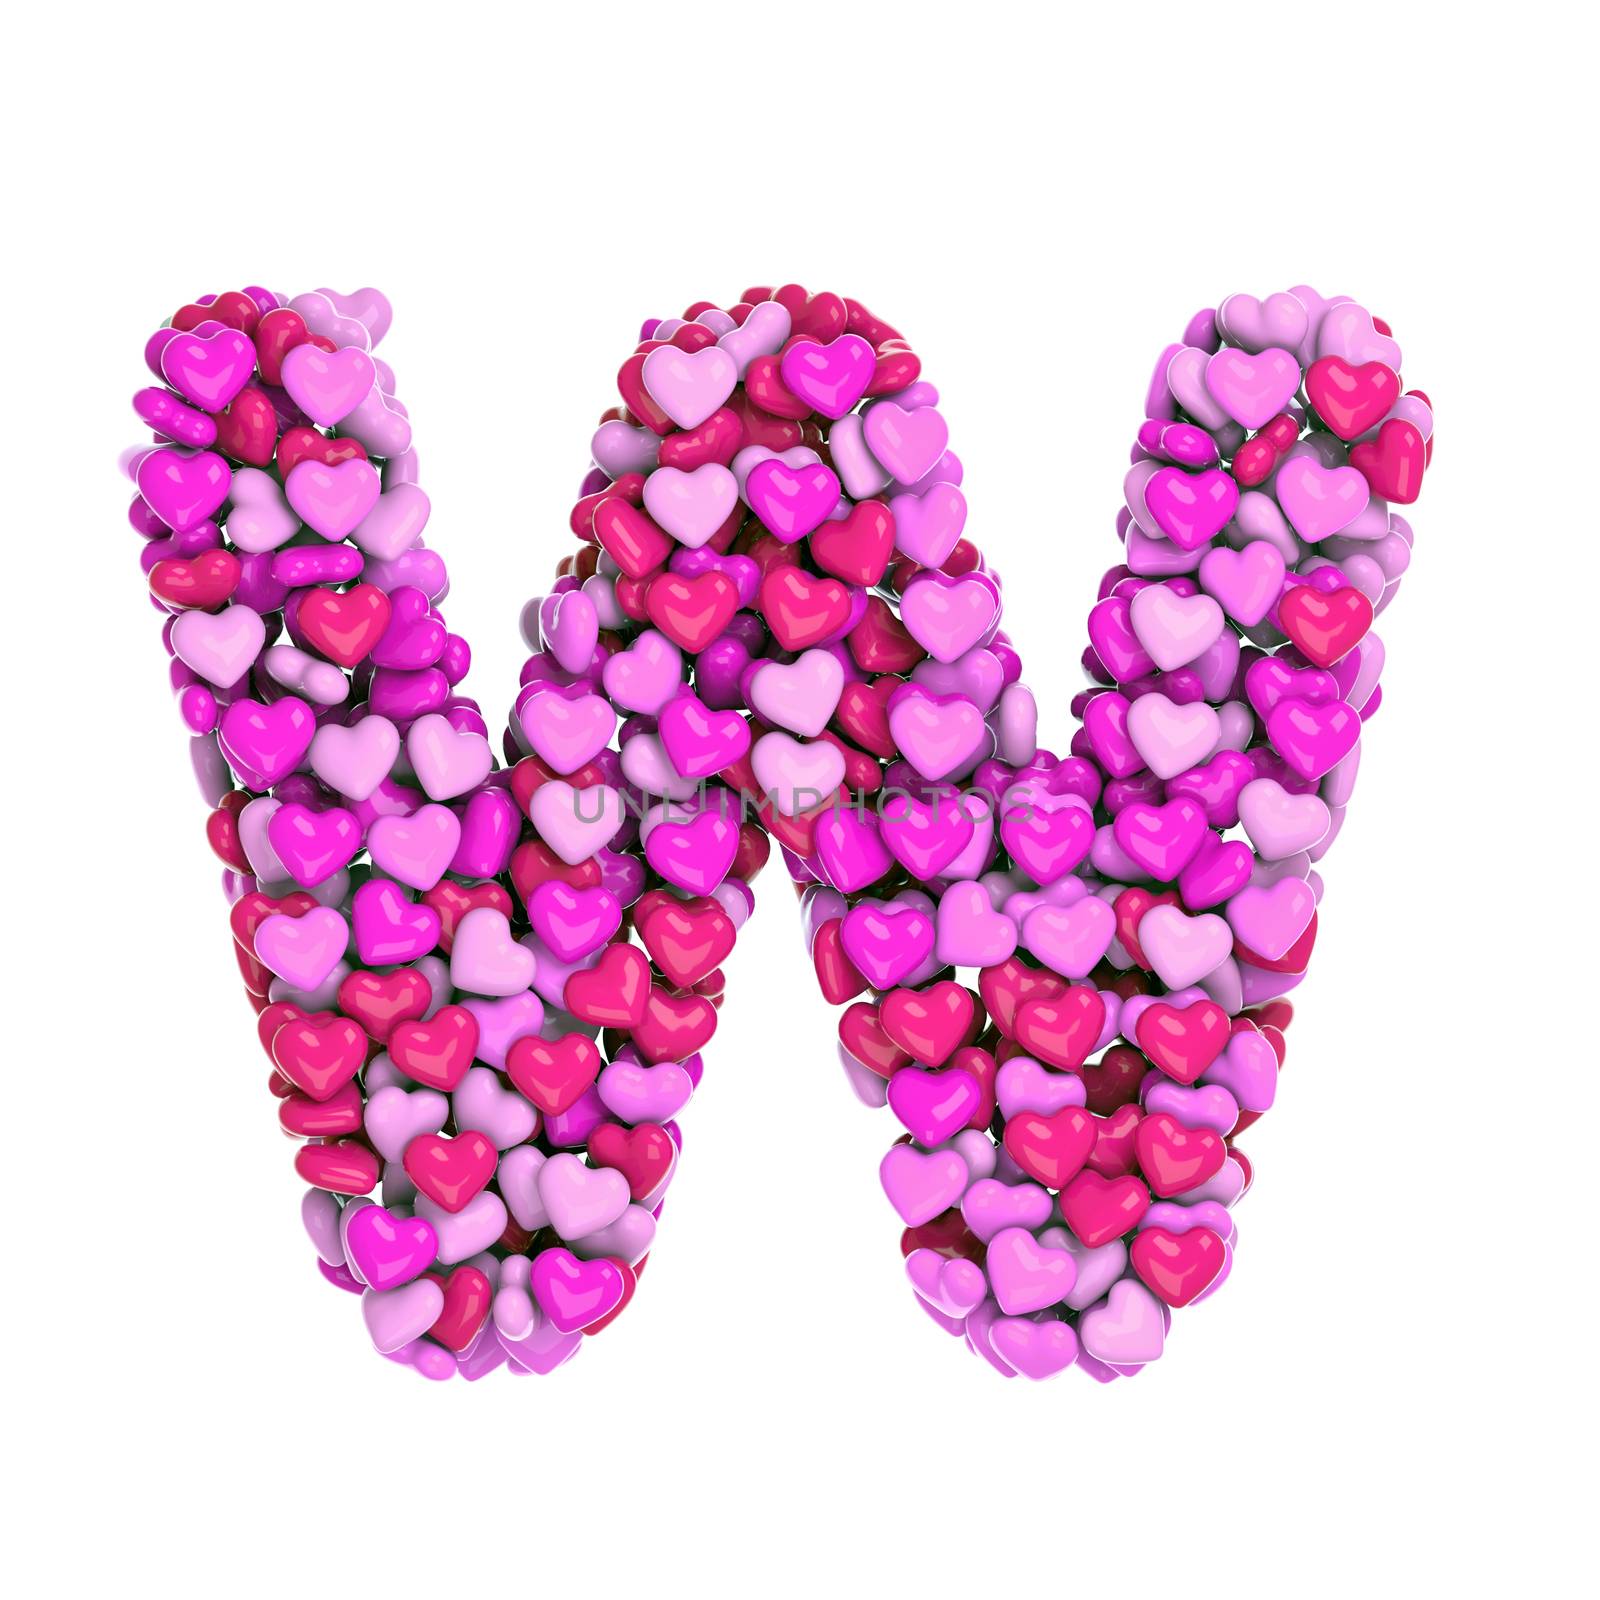 Valentine letter W - Capital 3d pink hearts font - Love, passion or wedding concept by chrisroll